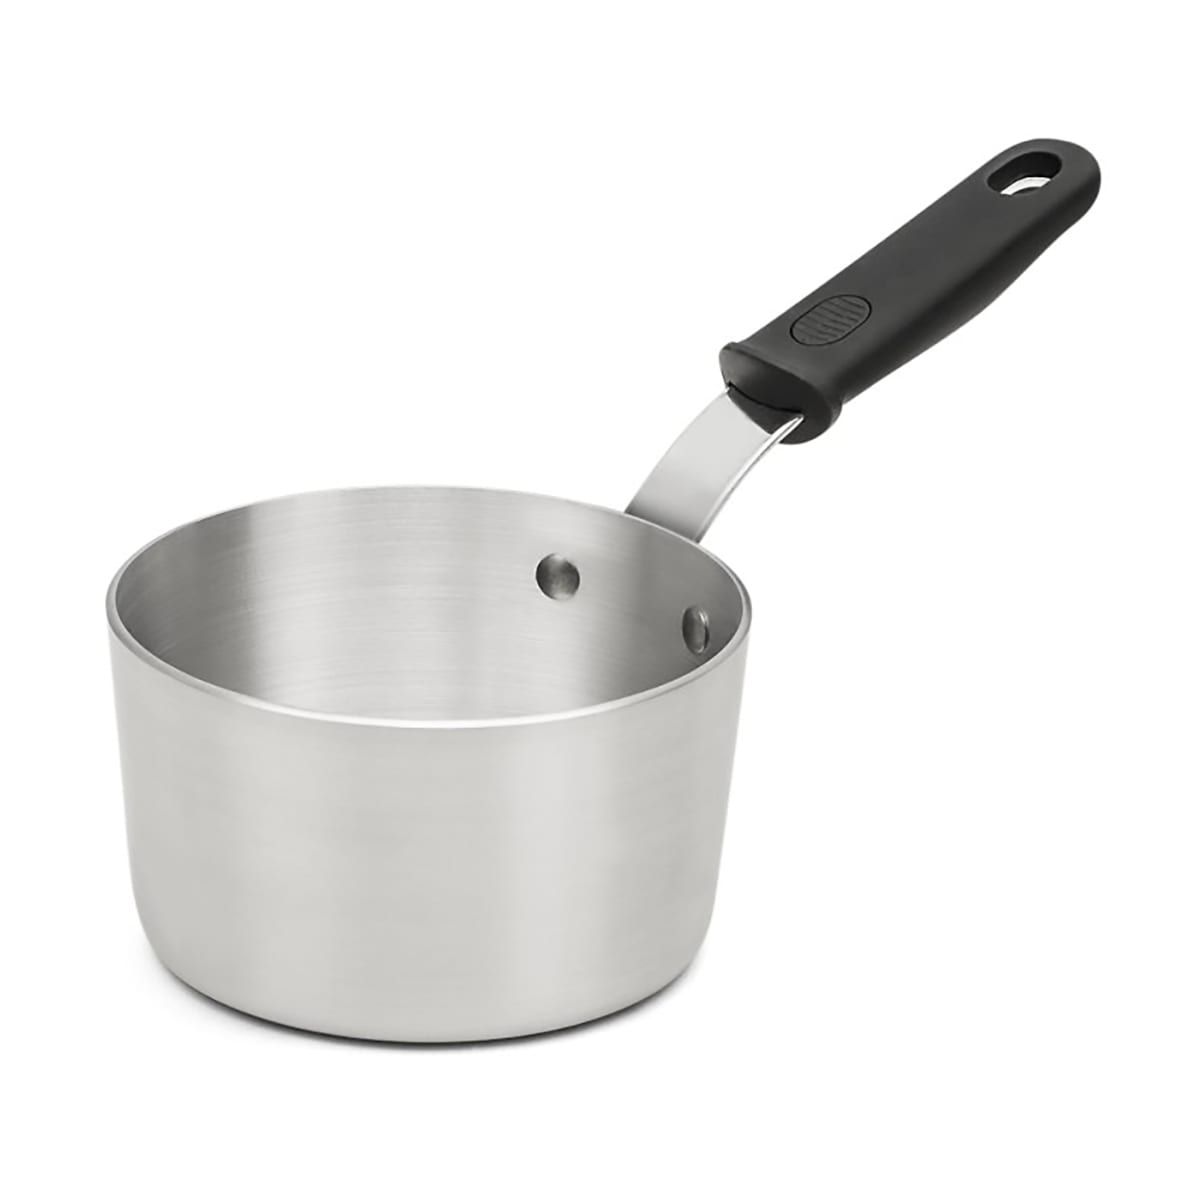 Professional Series™ Cookware 1.5 Quart Saucepan with Cover 